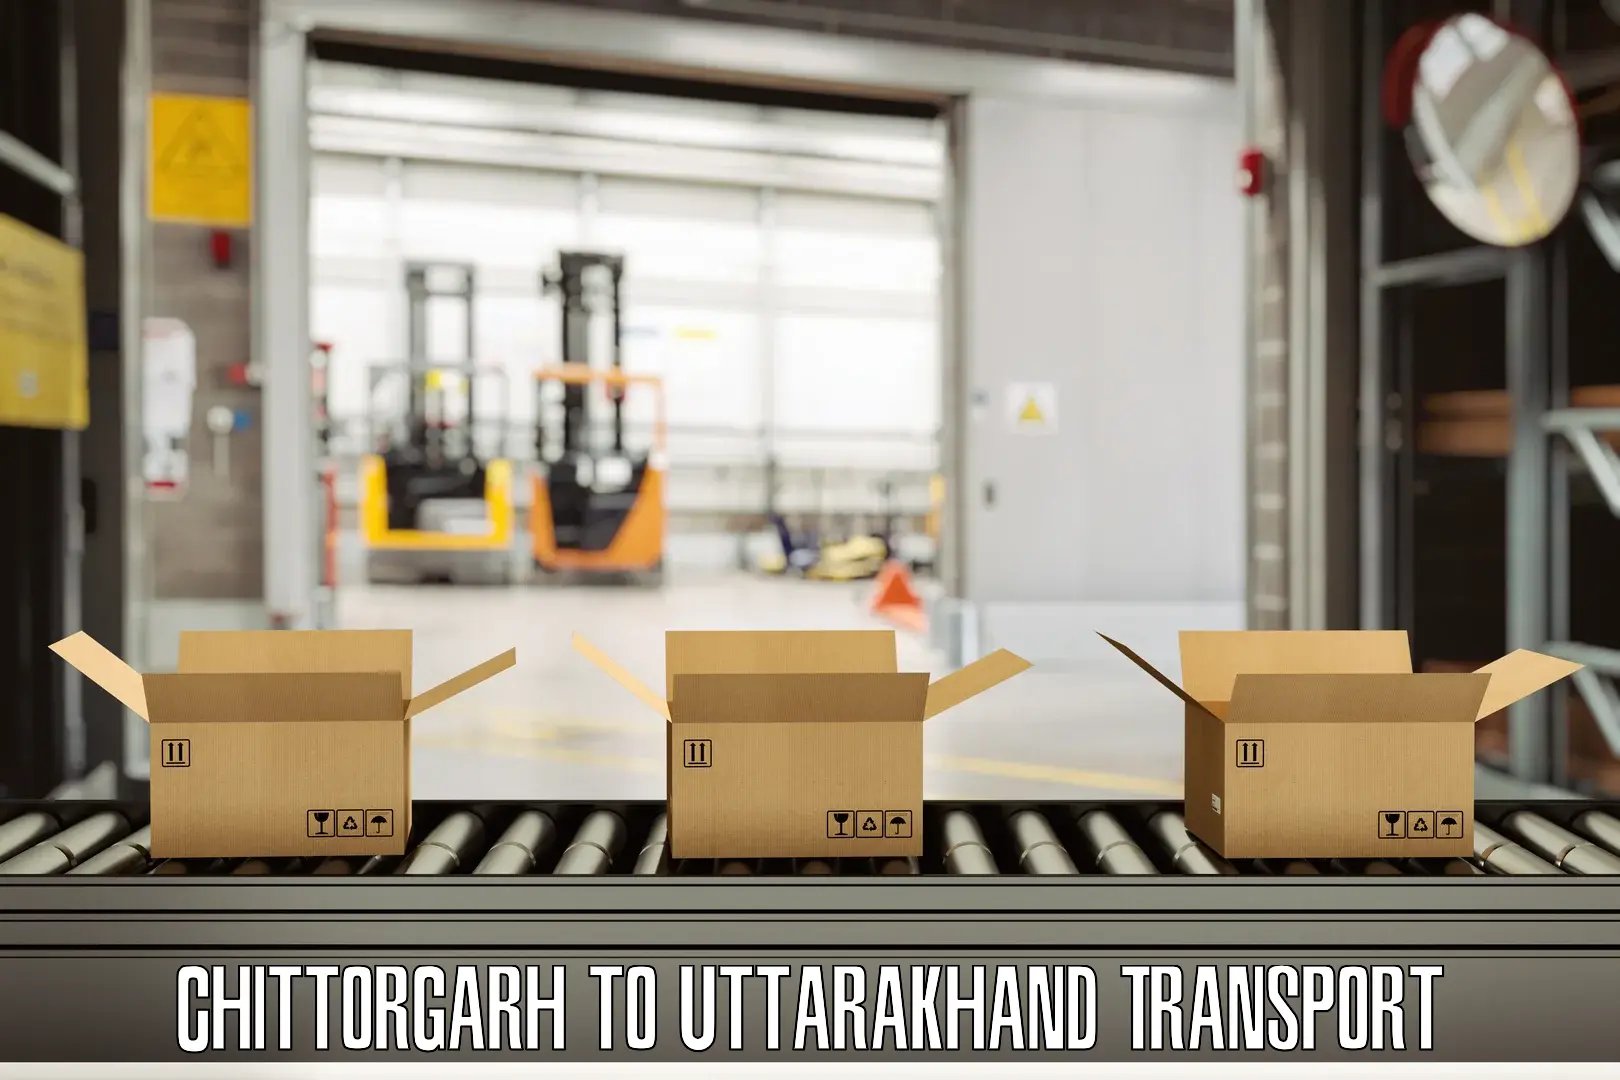 Domestic goods transportation services in Chittorgarh to IIT Roorkee